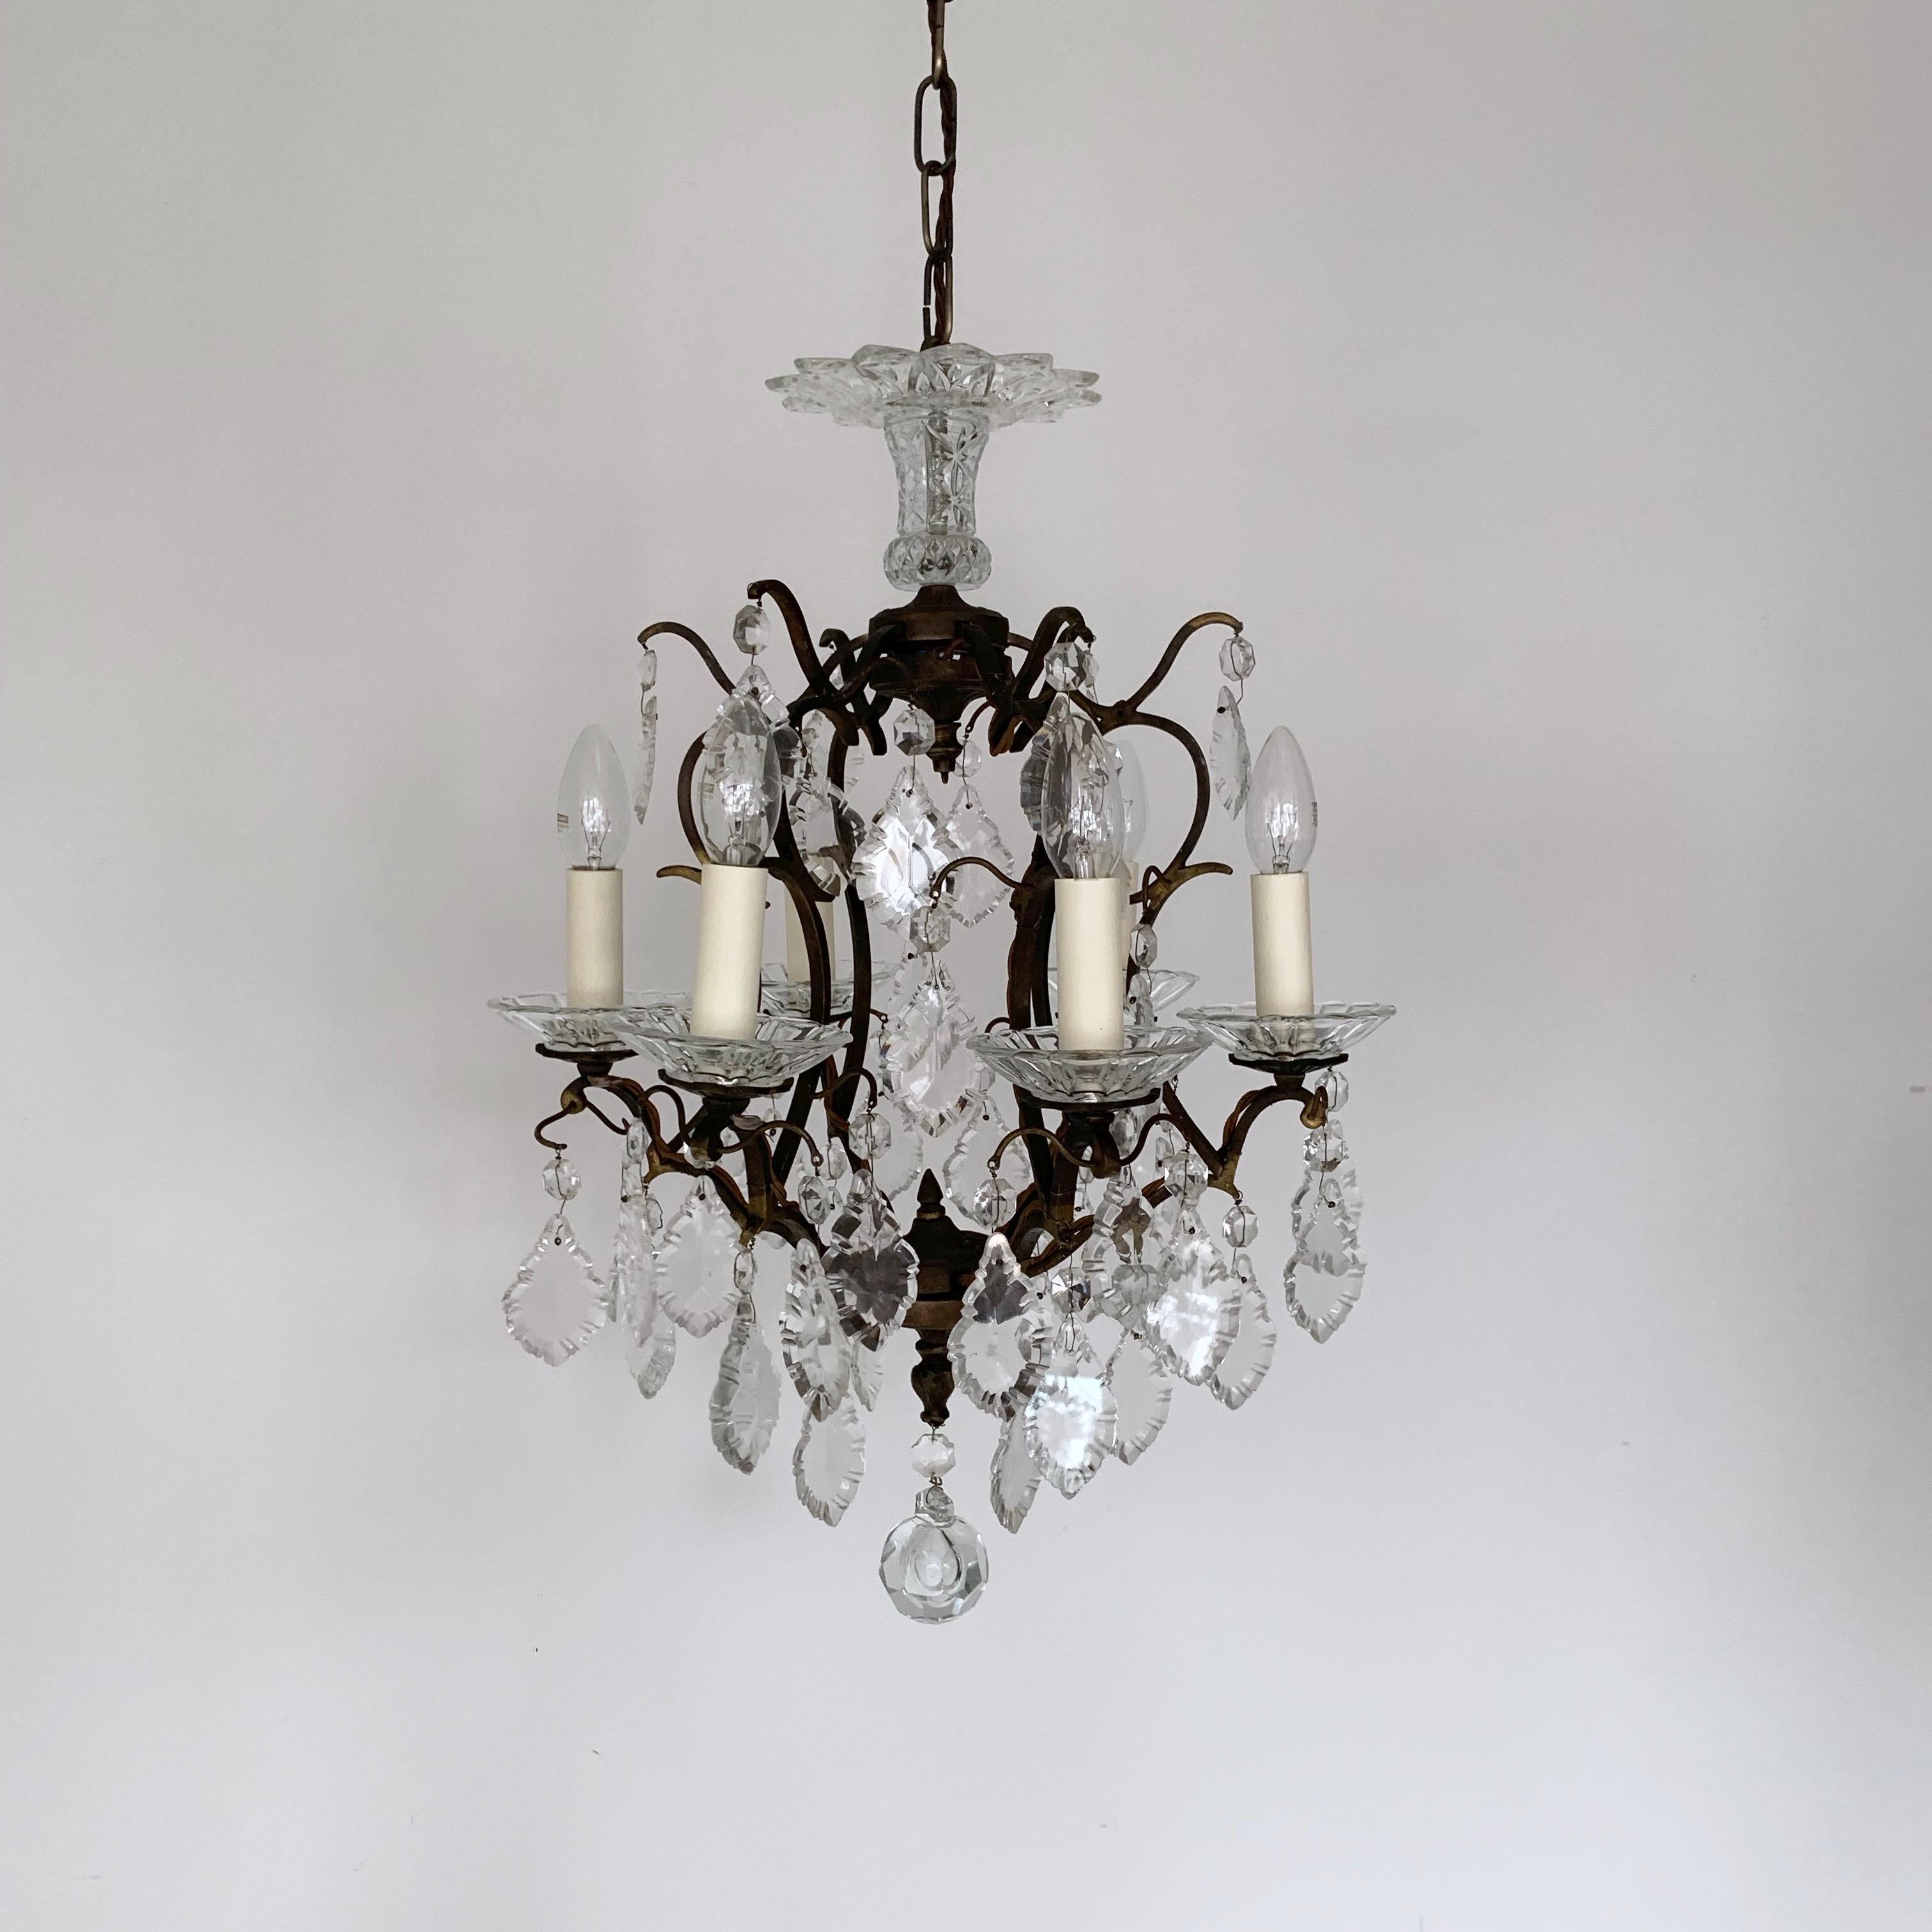 Italian Birdcage Chandelier with Glass Details For Sale 1